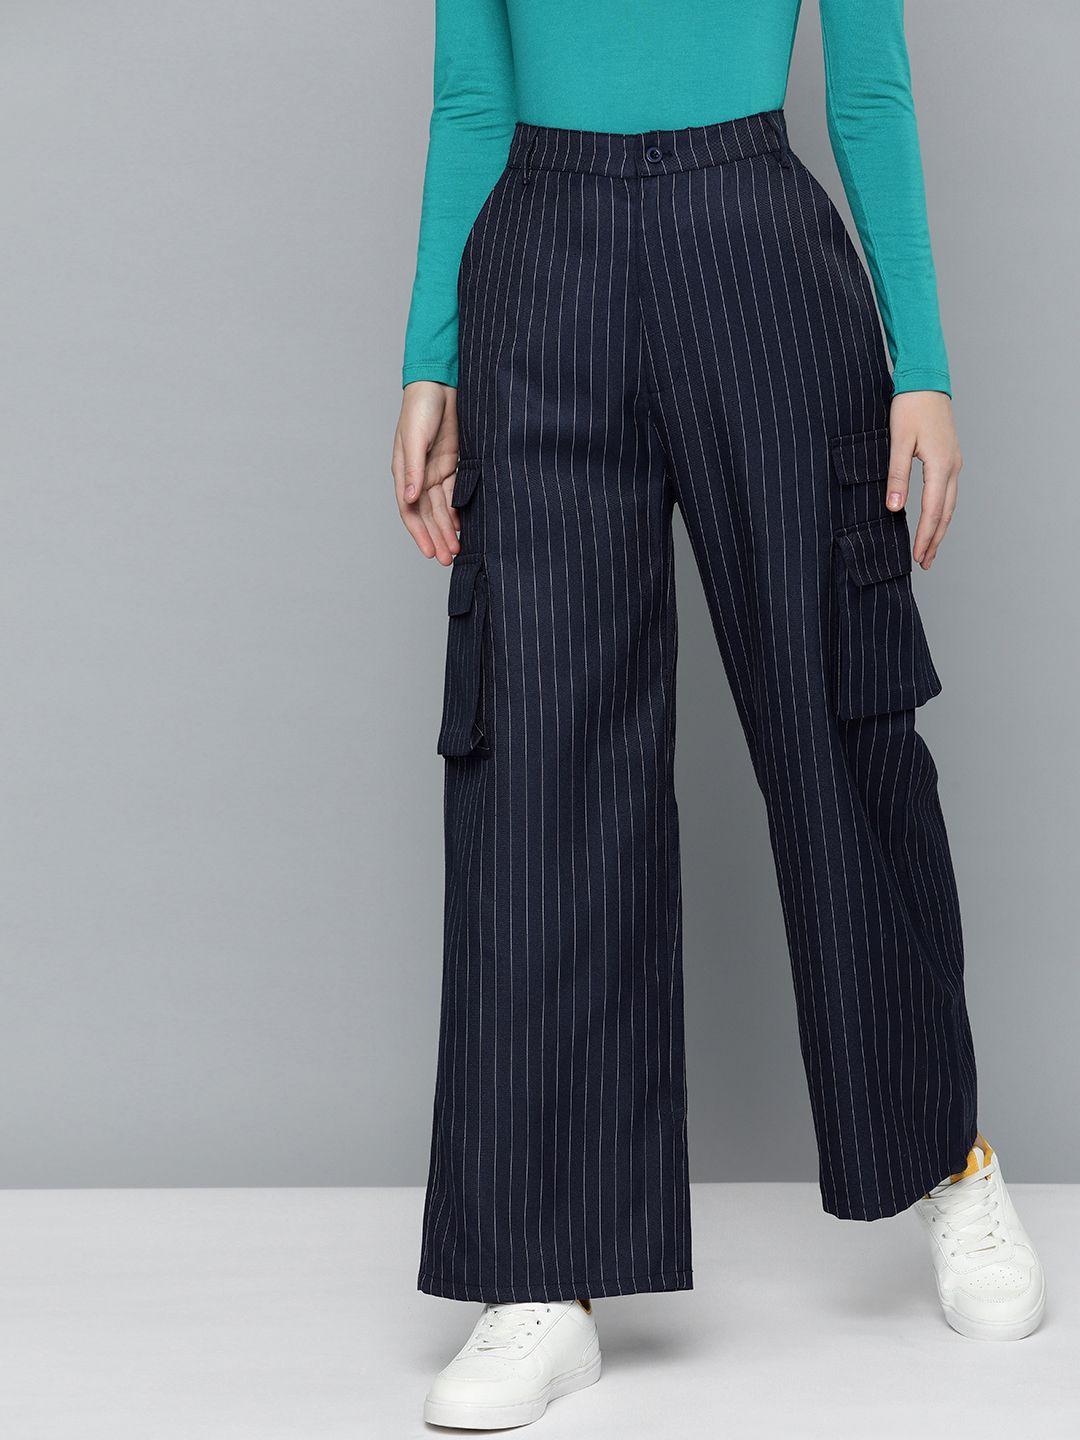 mast & harbour women striped cargos style parallel trousers